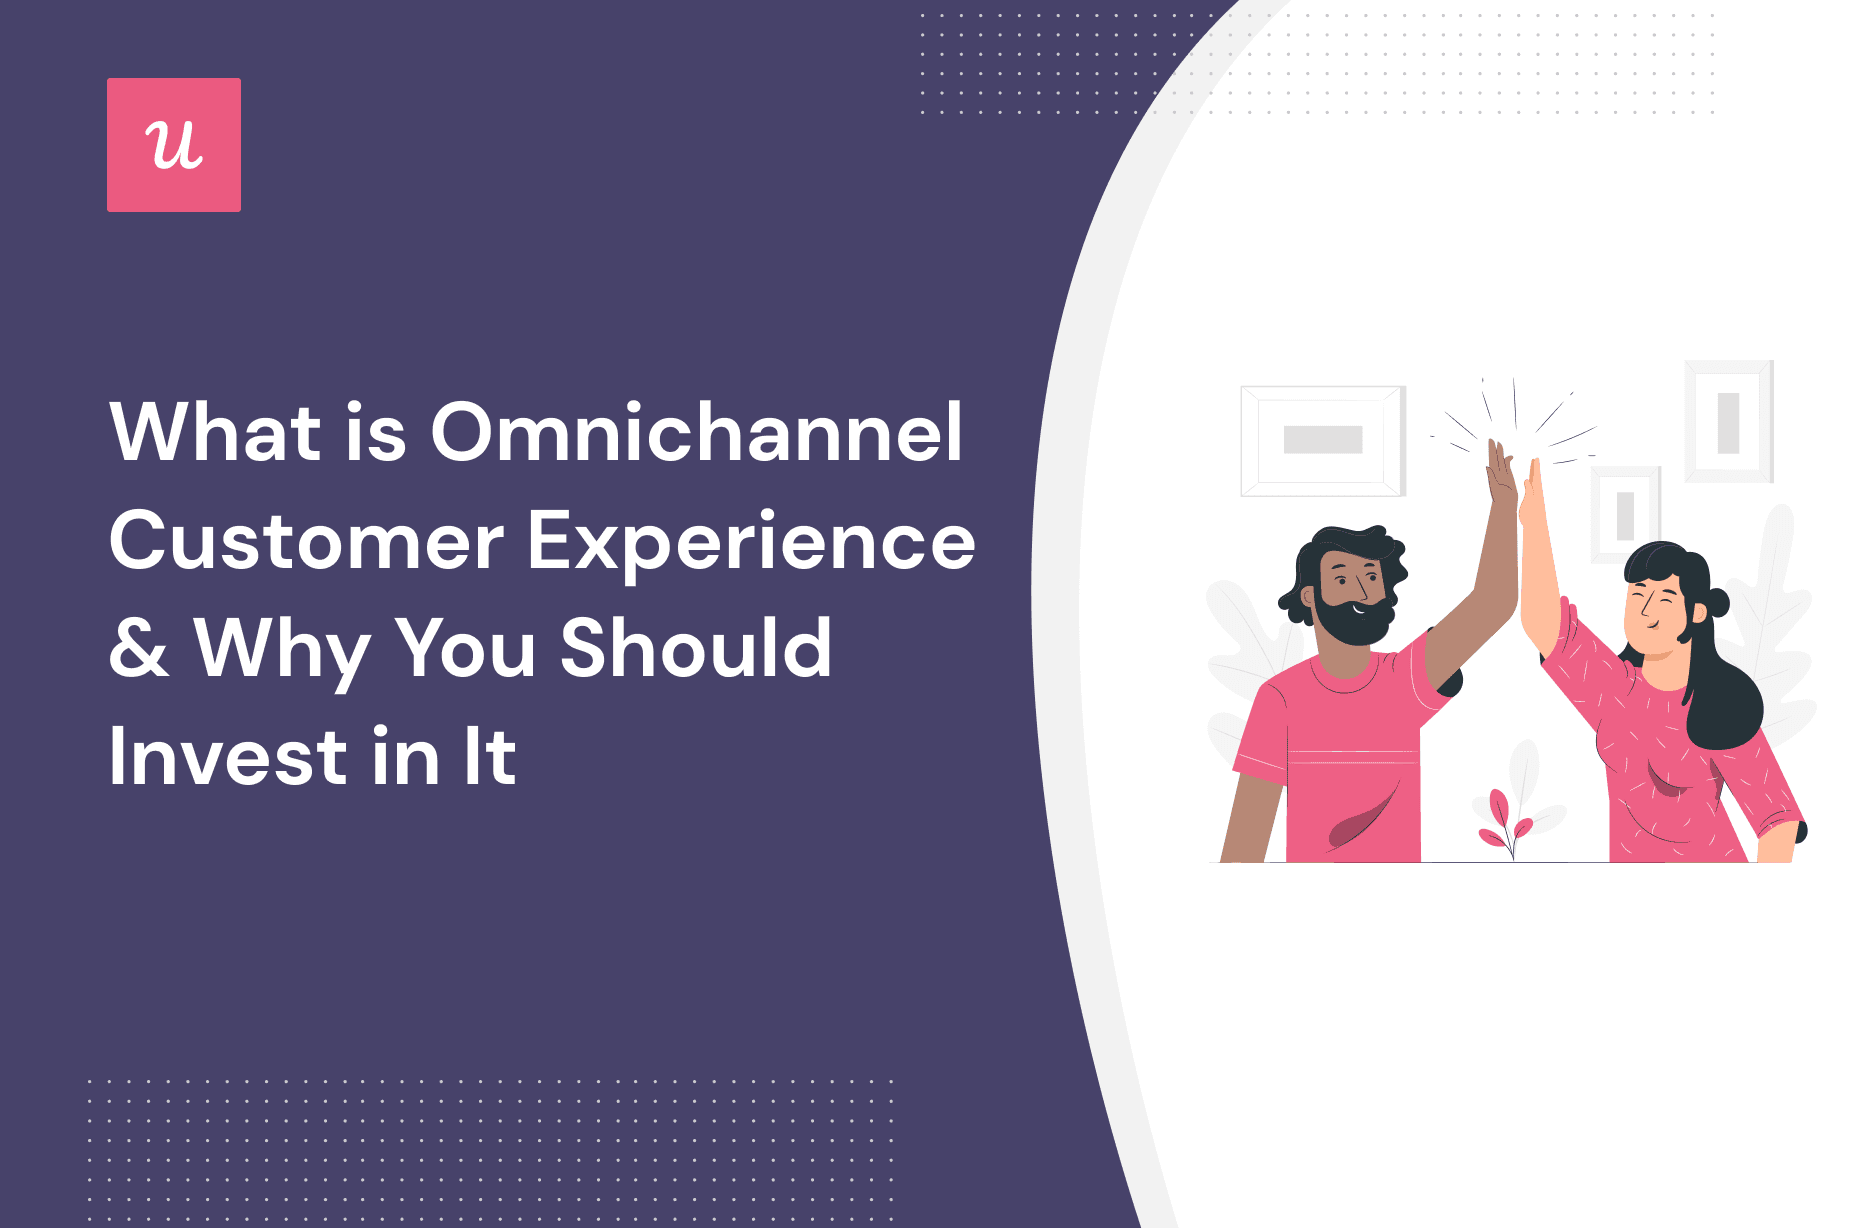 What is Omnichannel Customer Experience & Why You Should Invest In It cover